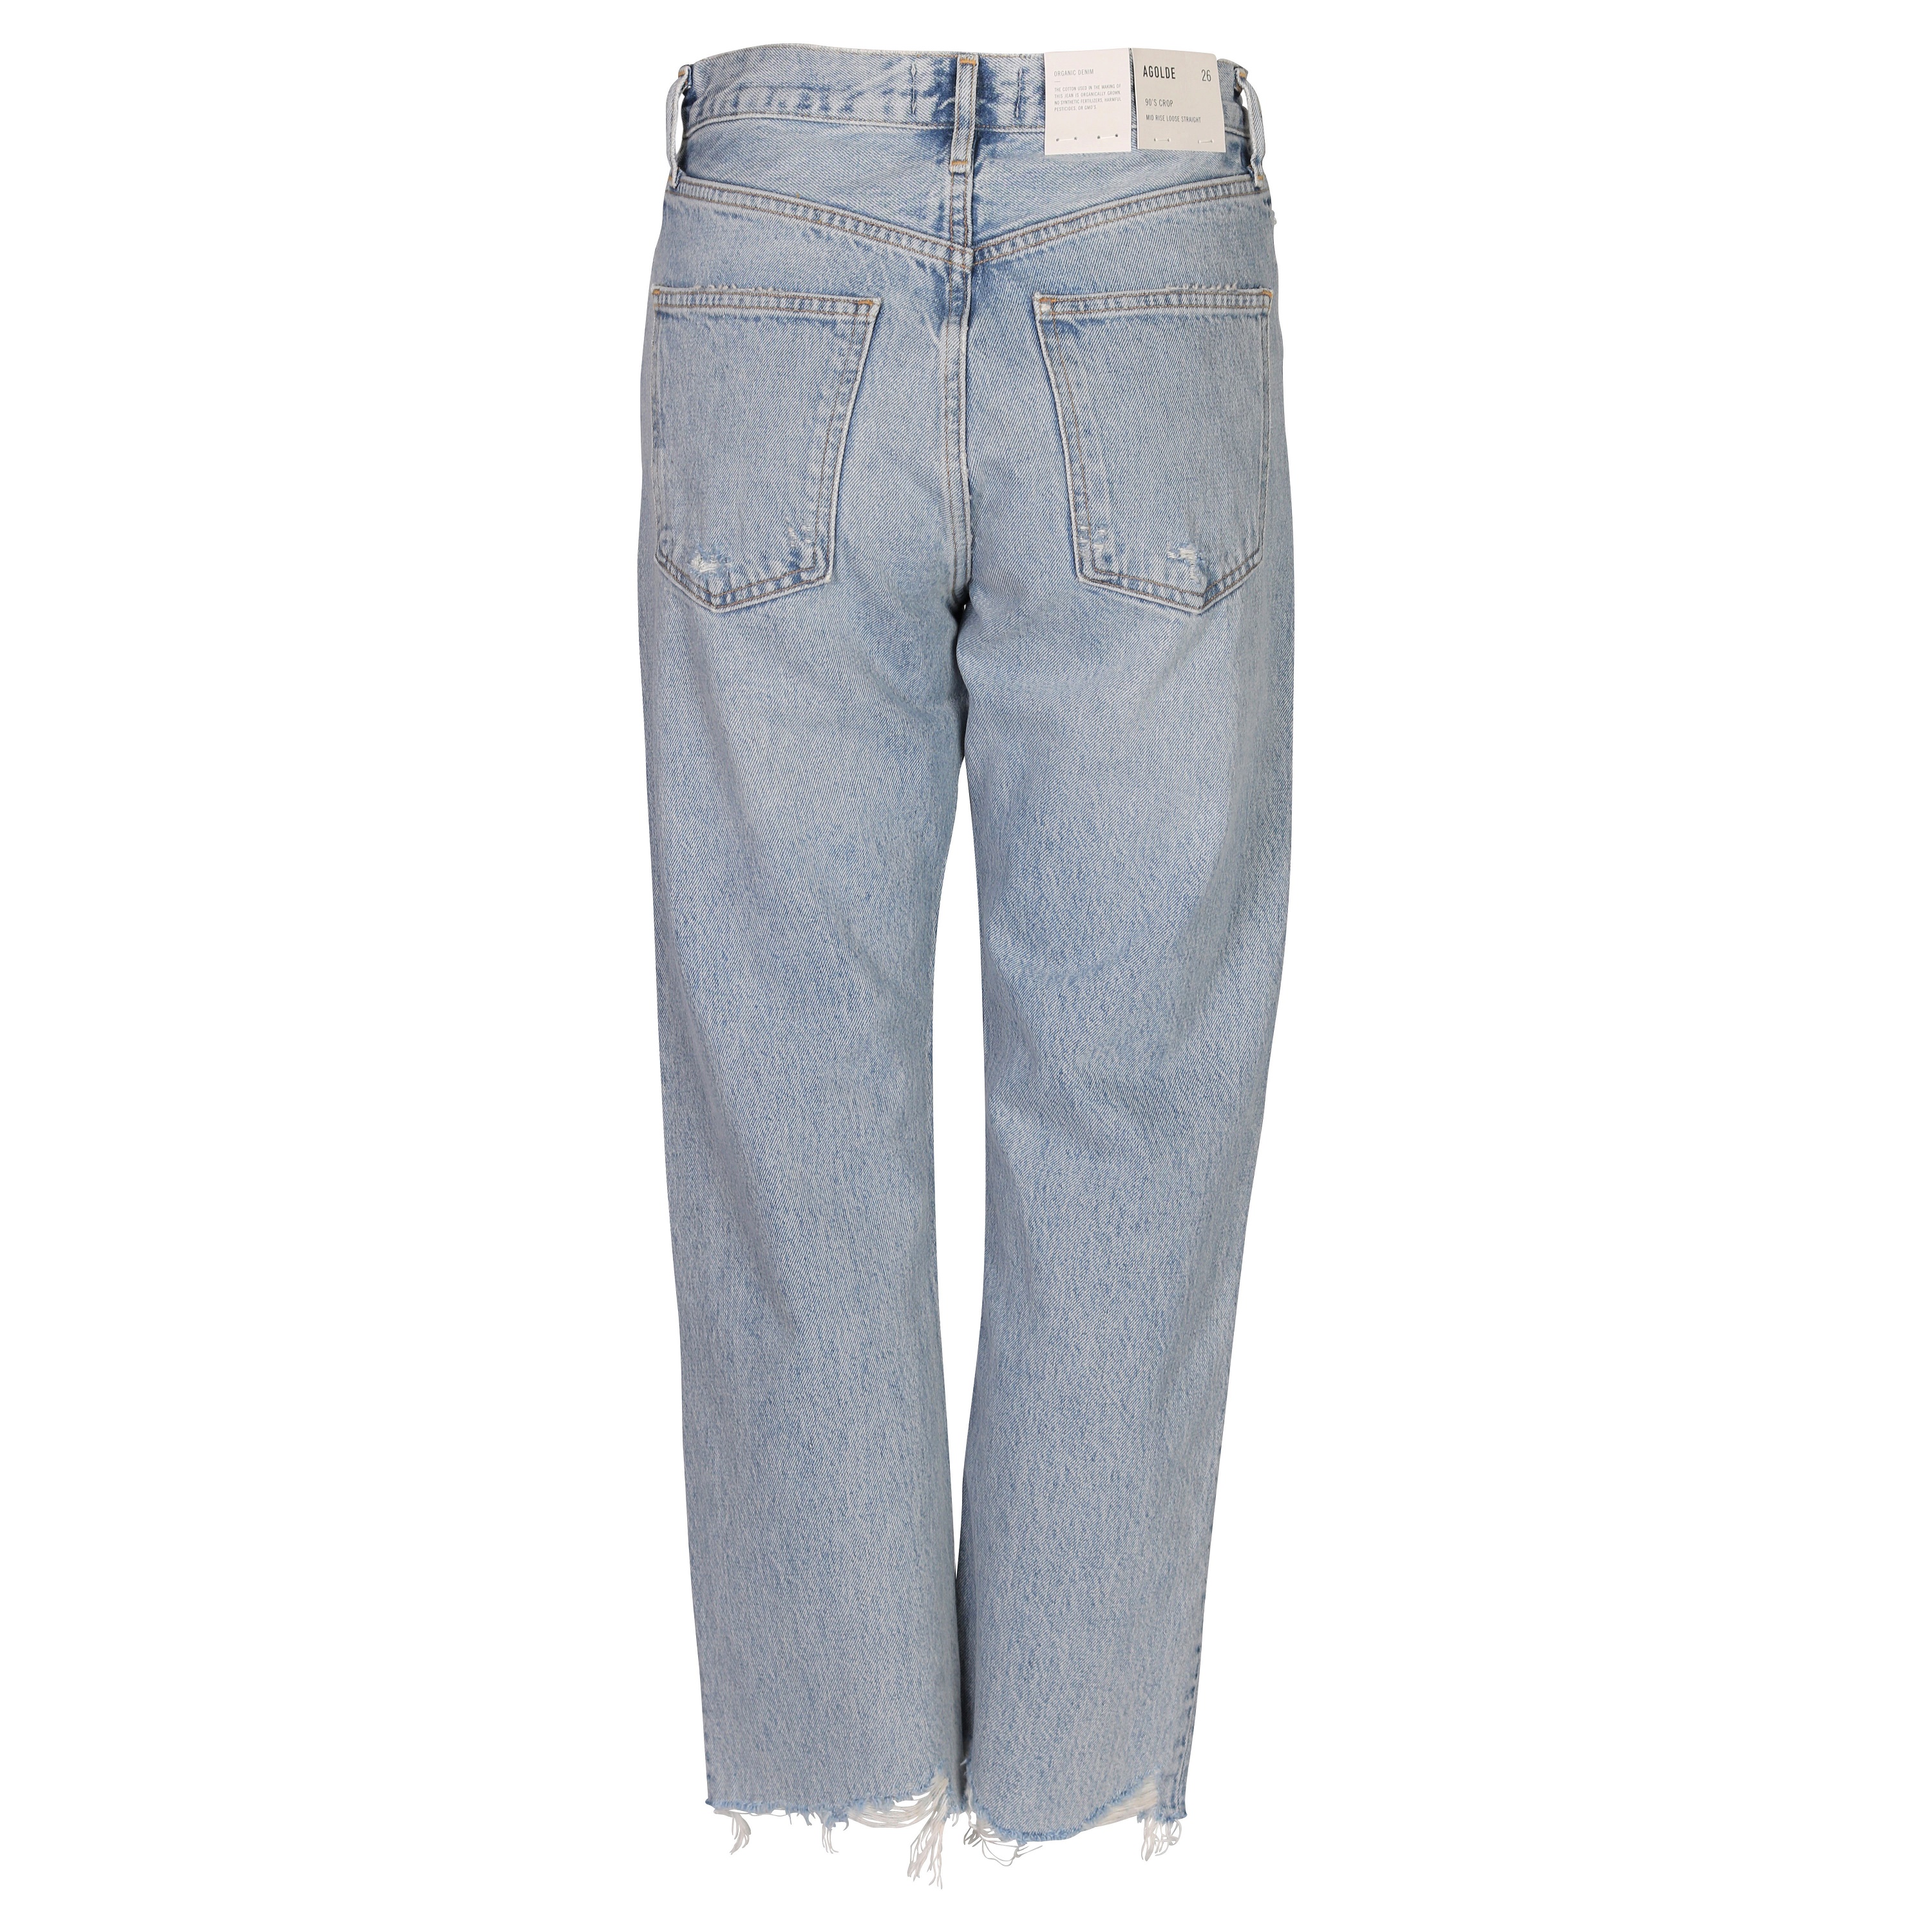 Agolde Jeans 90s Cropped in Nerve Washing W 27